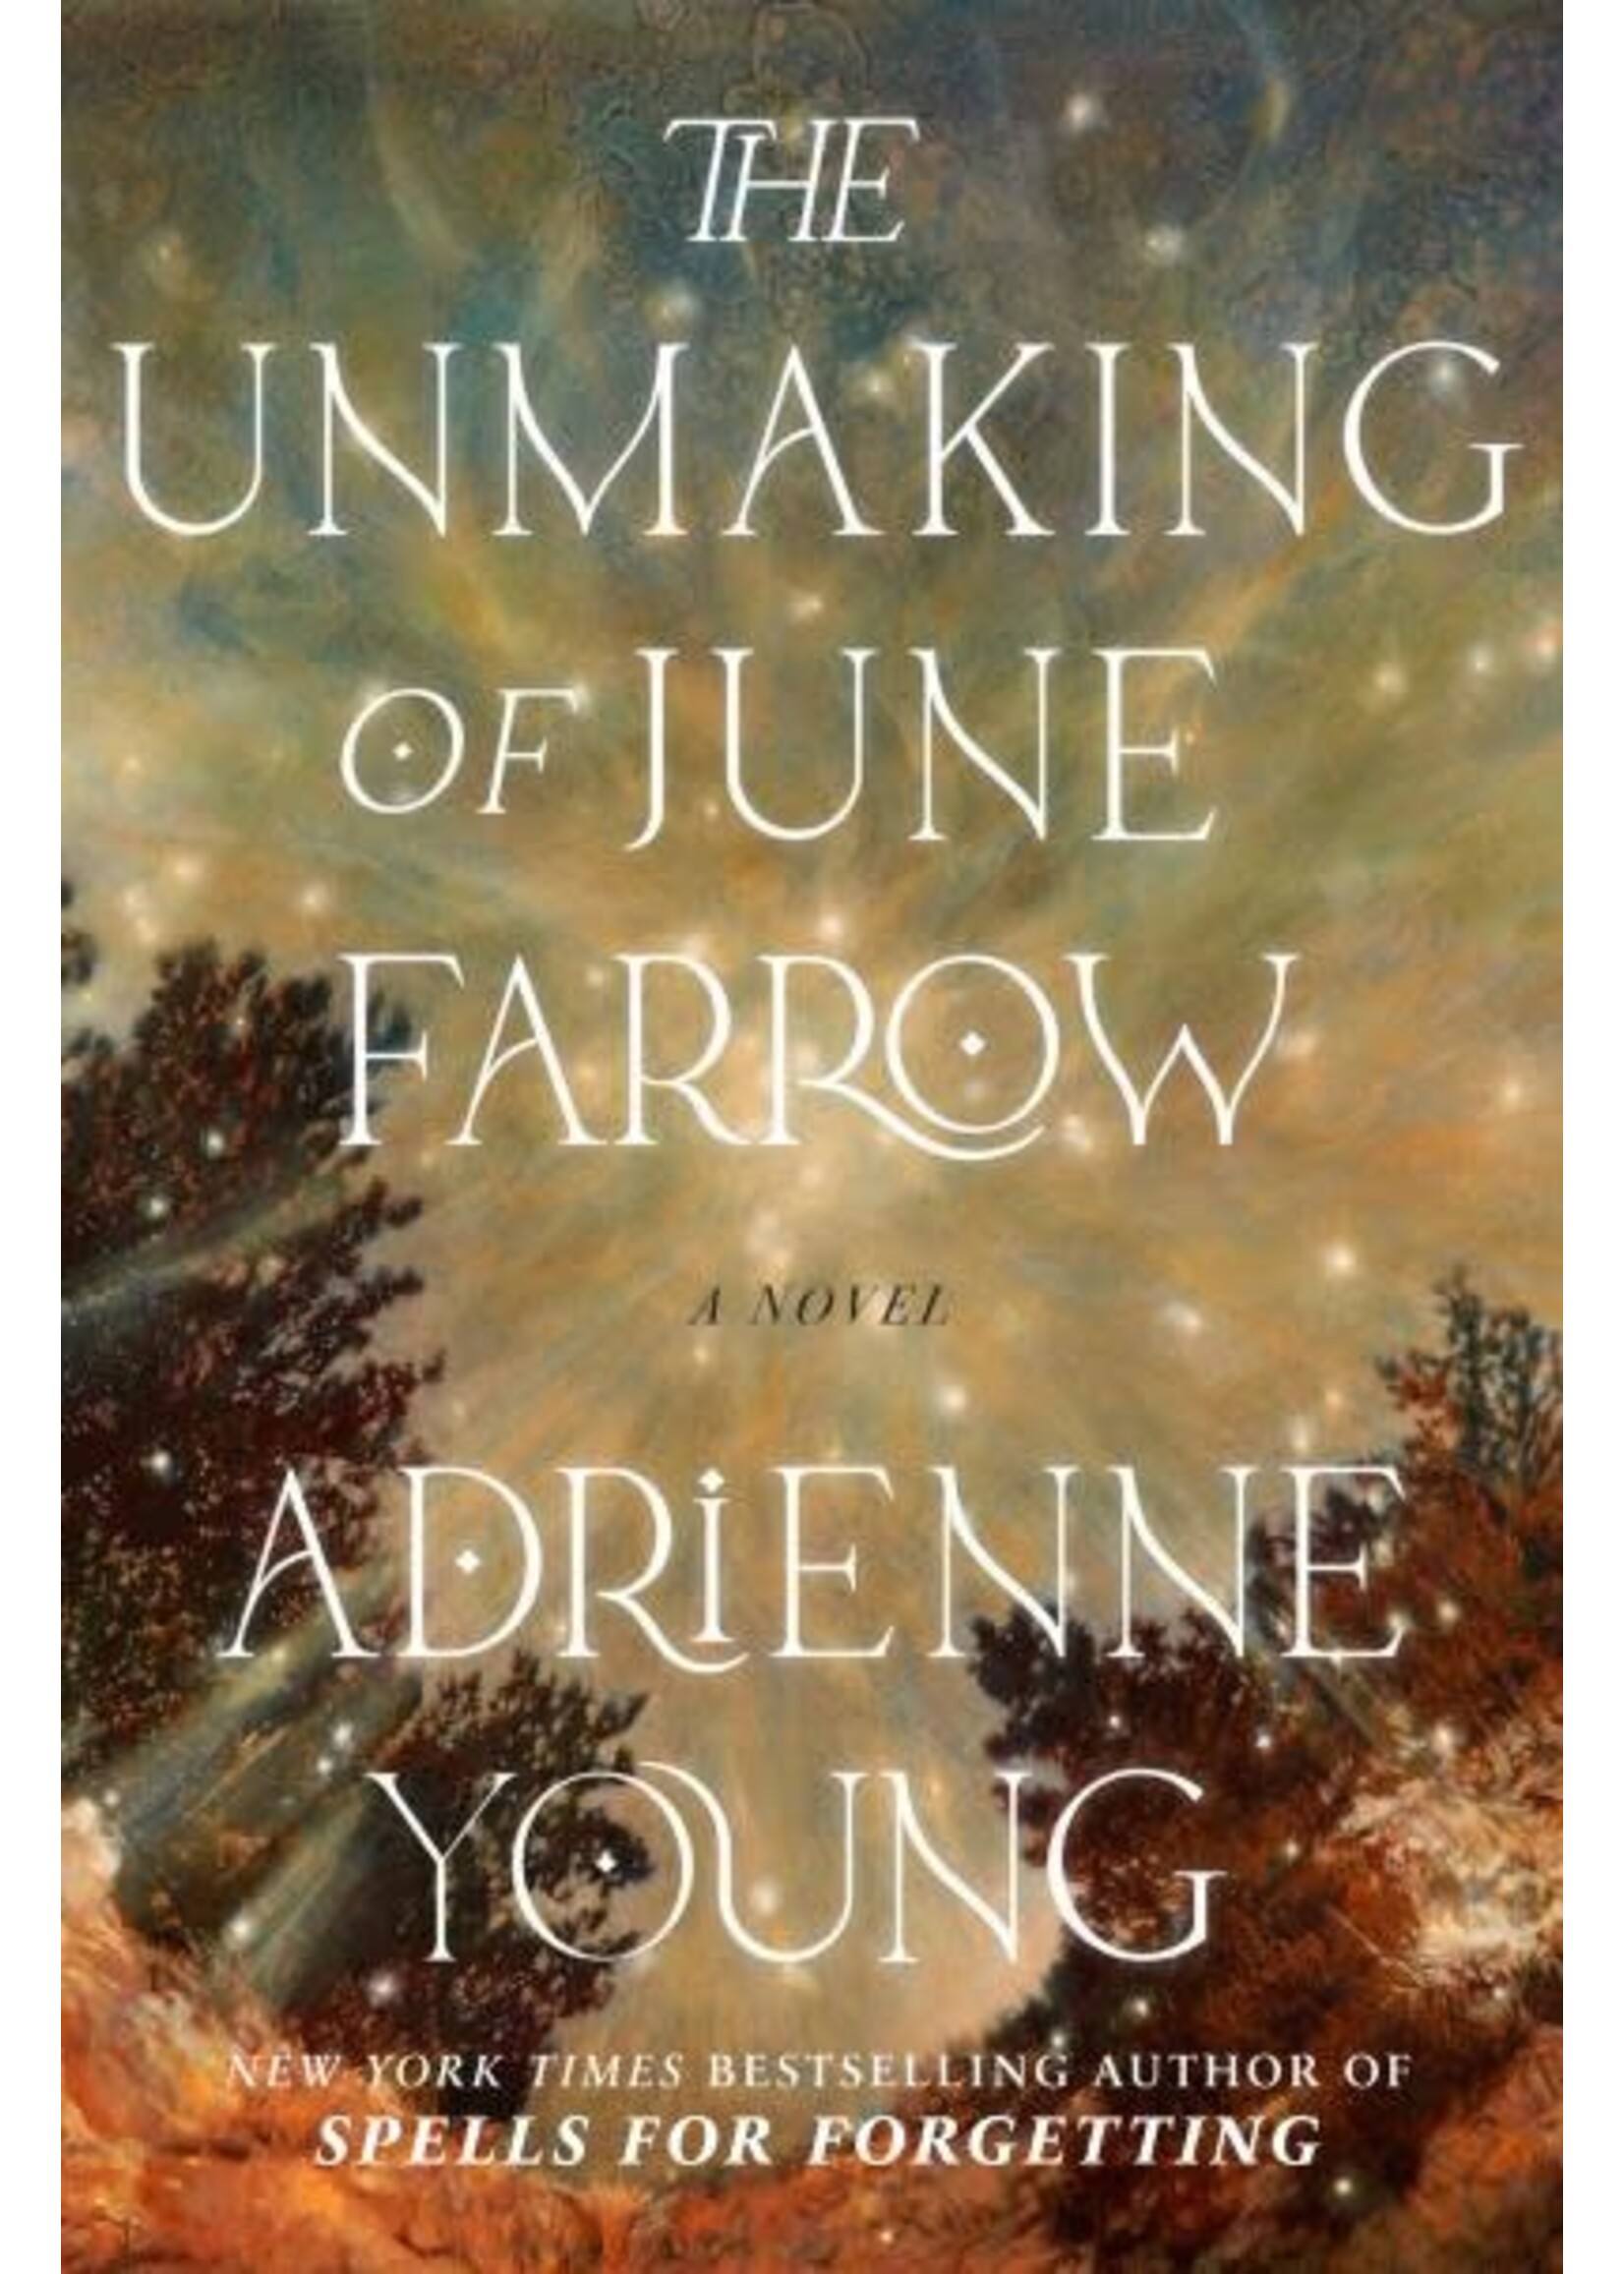 The Unmaking of June Farrow by Adrienne Young